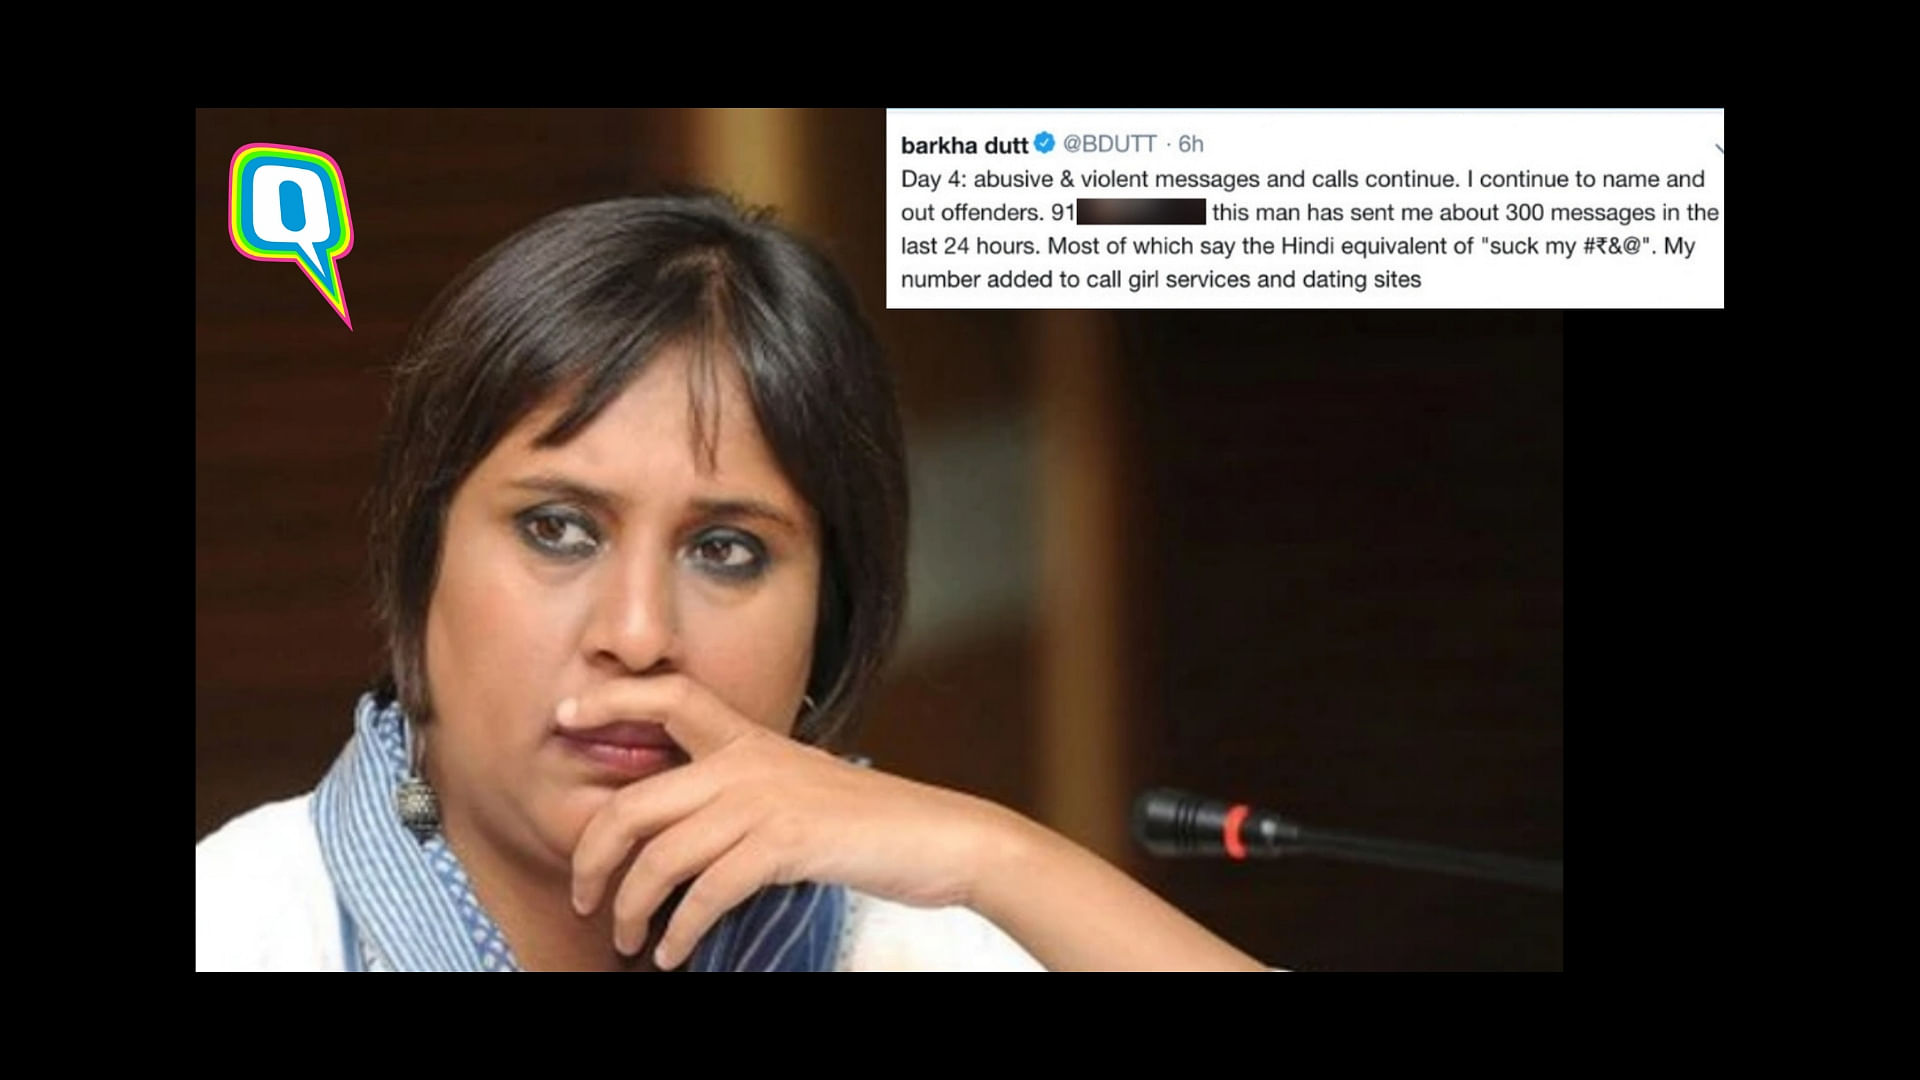  Journalist Barkha Dutt’s recent experience has made one thing clear.